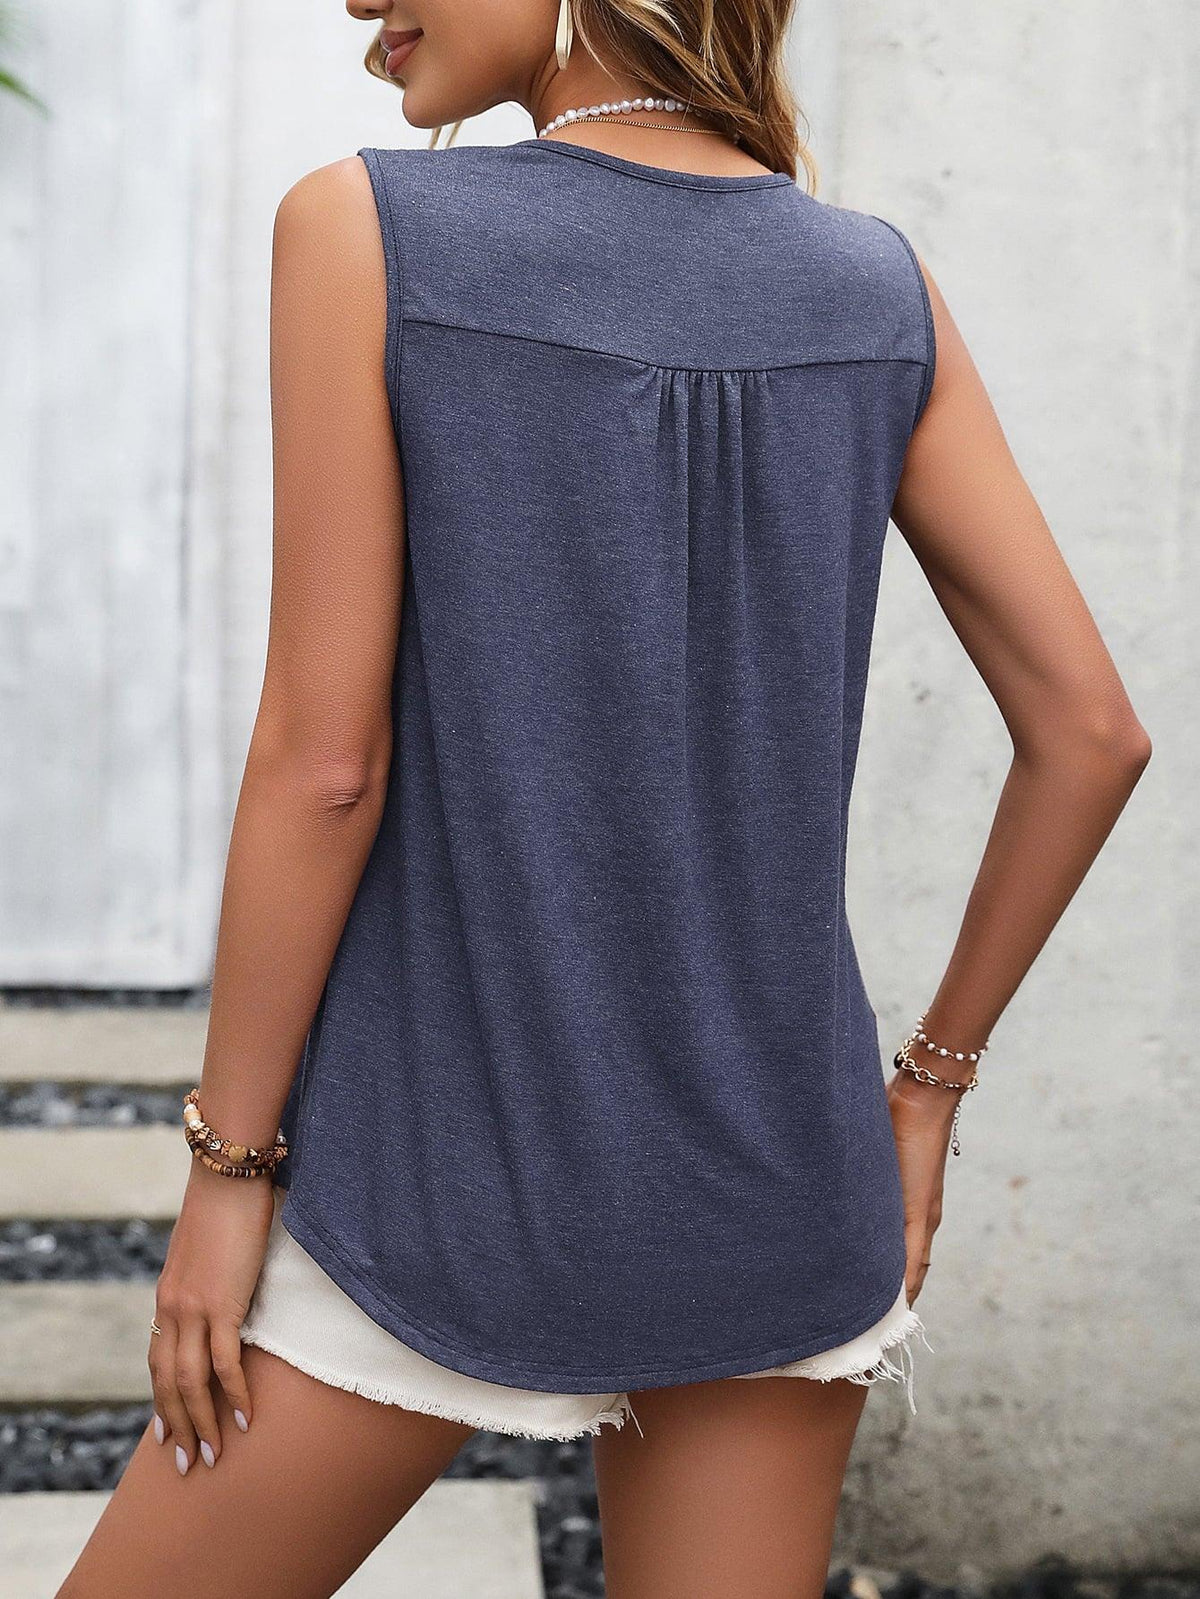 Lace Contrast Scoop Neck Tank - Crazy Like a Daisy Boutique #